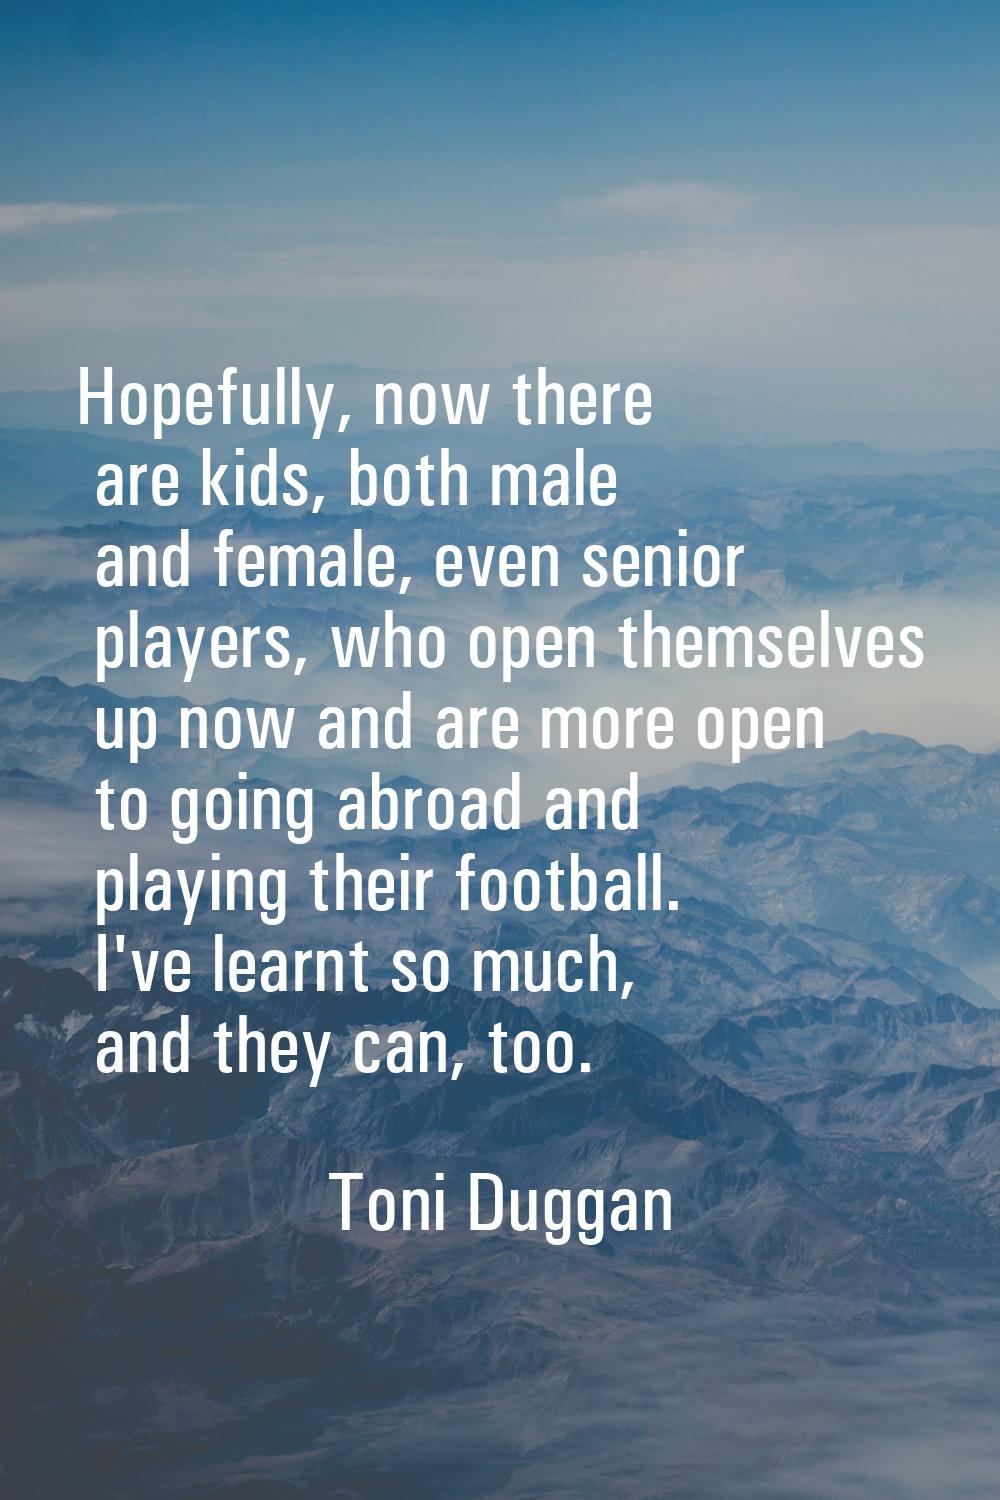 Hopefully, now there are kids, both male and female, even senior players, who open themselves up no